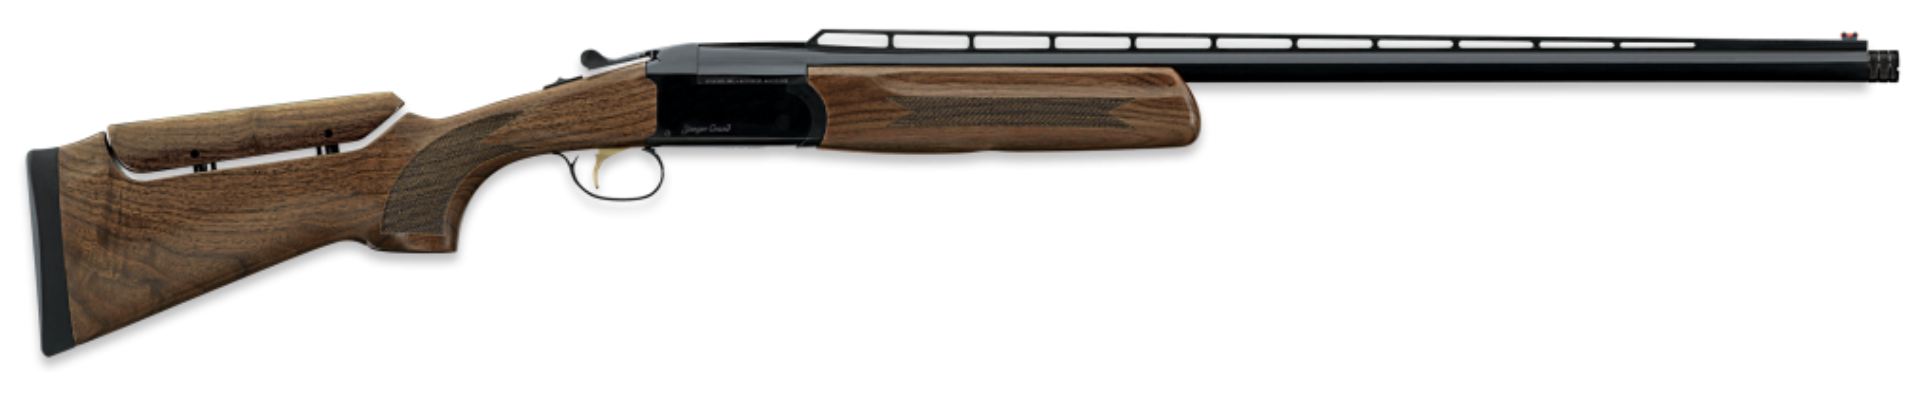 Stoeger Industries: Profiling the Quality and Affordability of a Gunmaker